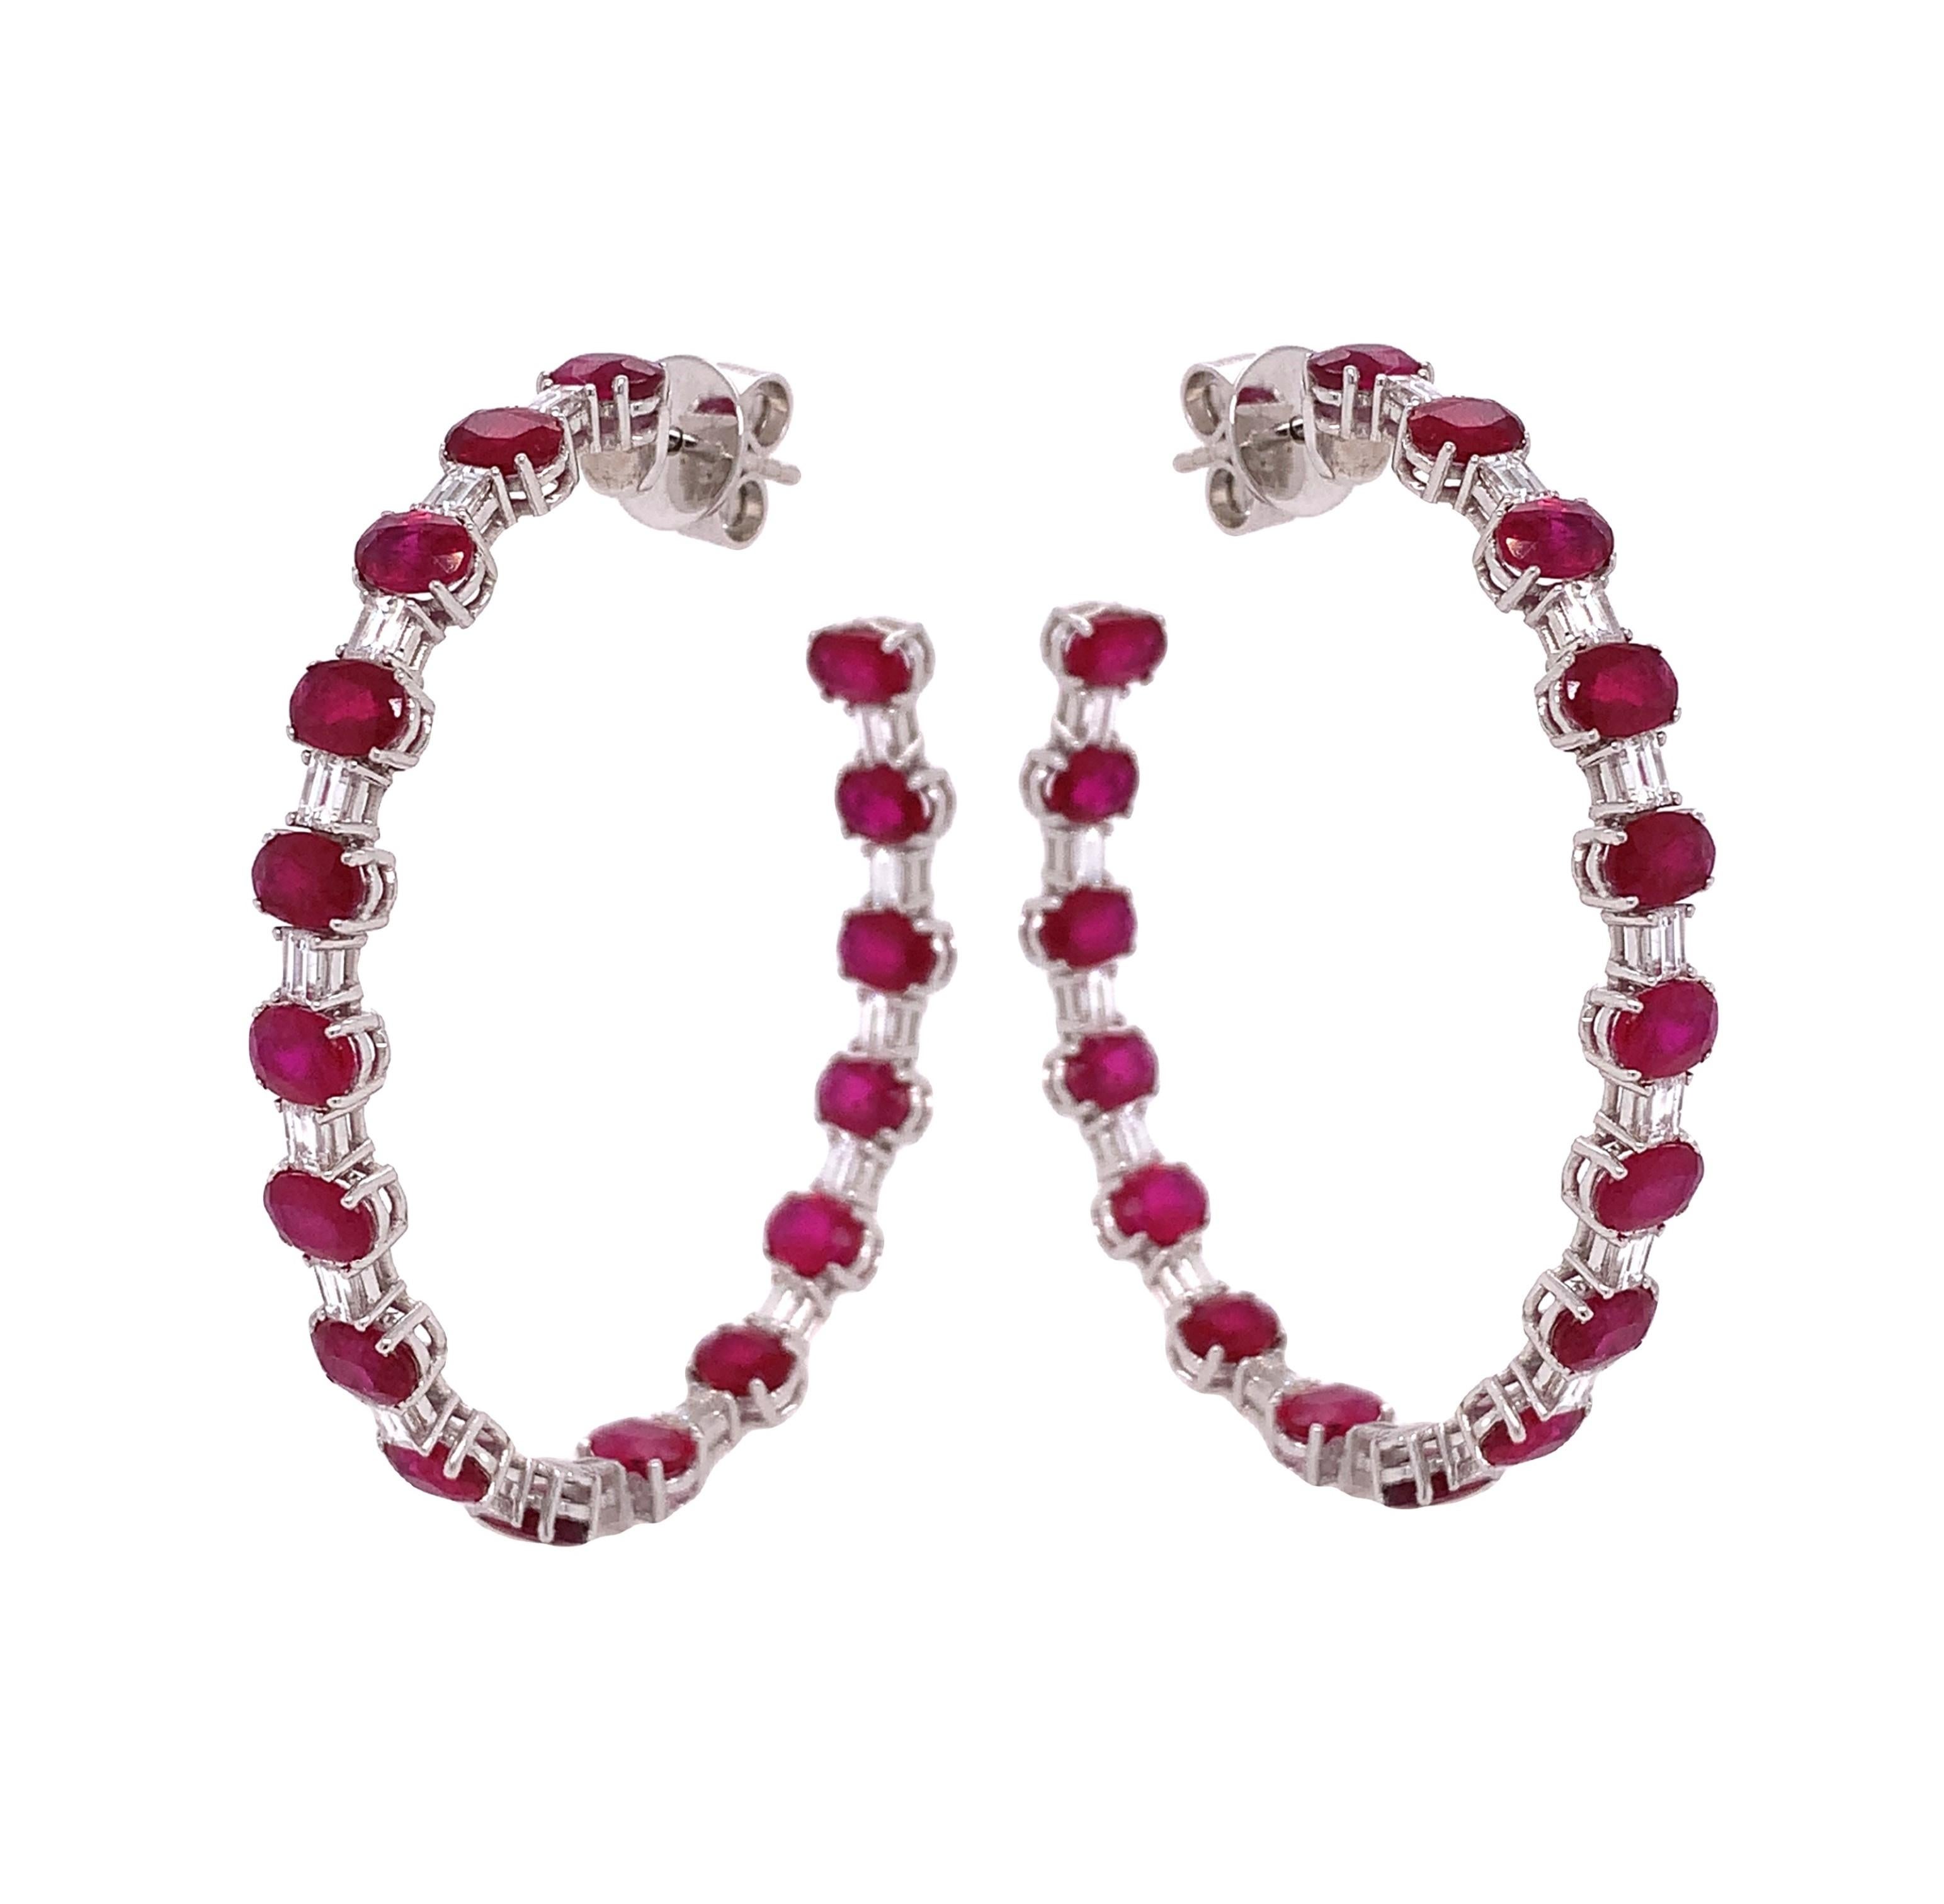 18K White Gold
Ruby: 9.54ct total weight.
Diamond: 1.77ct total weight.
All diamonds are G-H/SI stones.